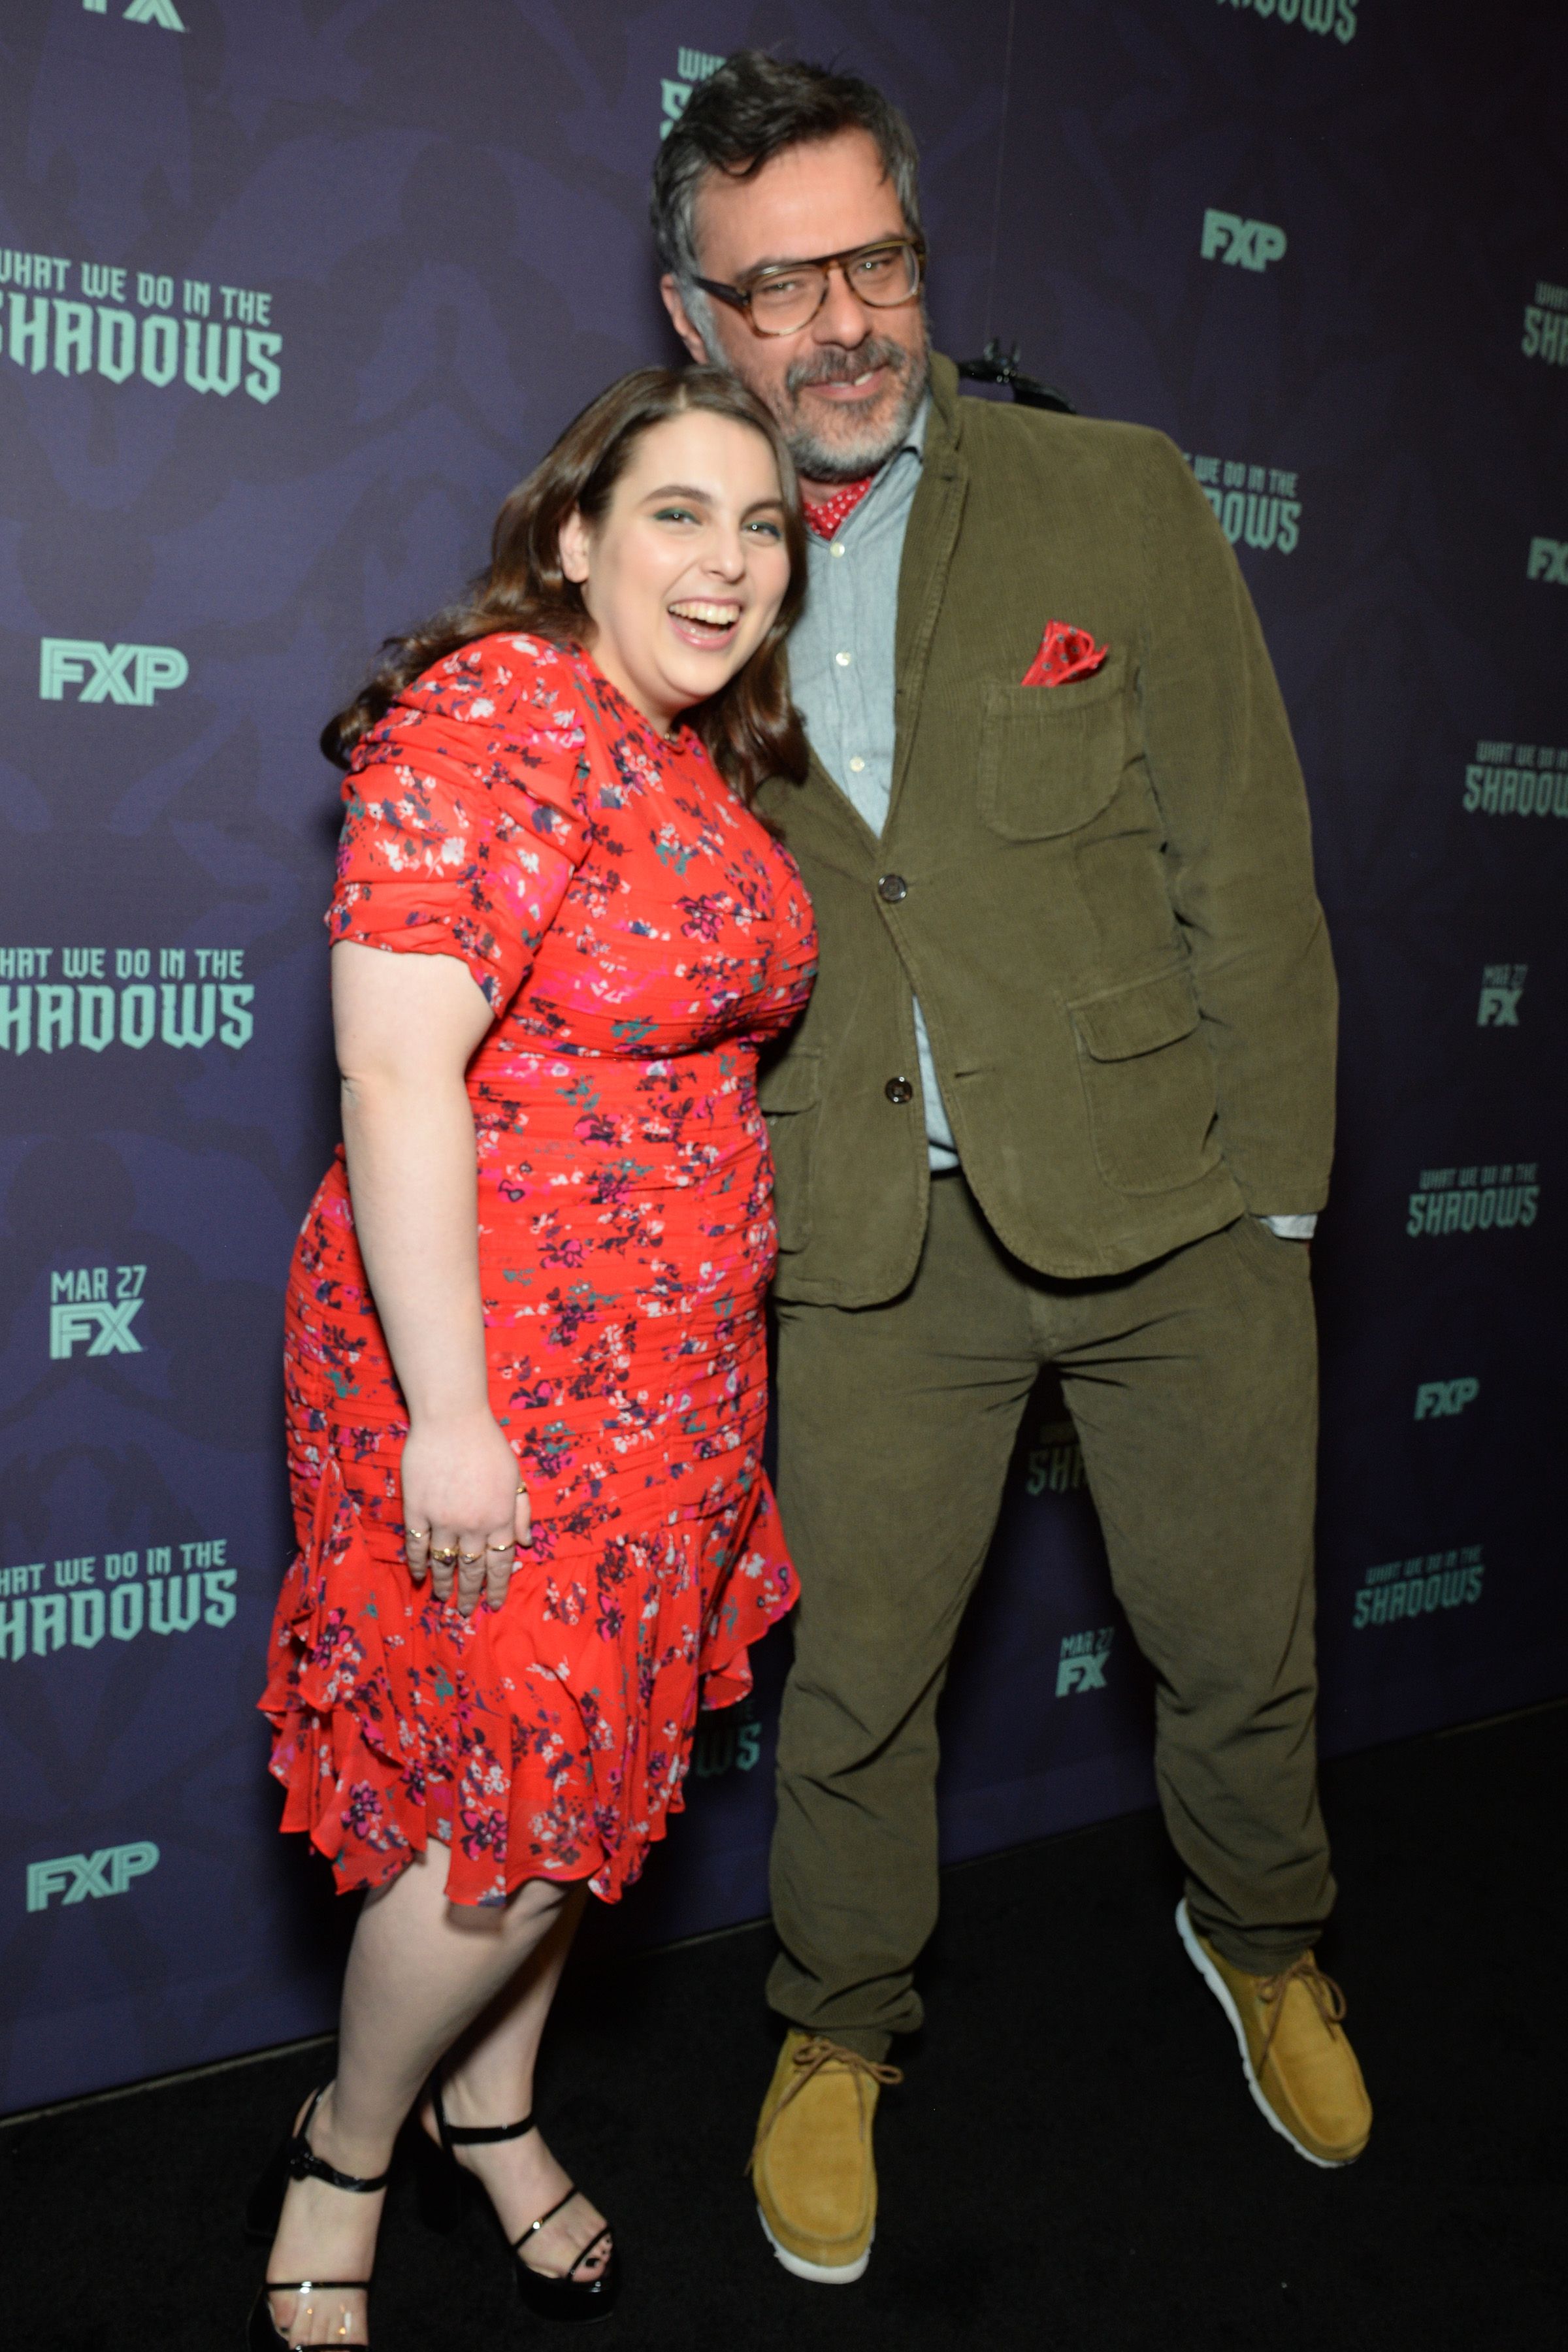 Behind the Scenes at the What We Do in the Shadows Premiere New York City for the FX TV Series